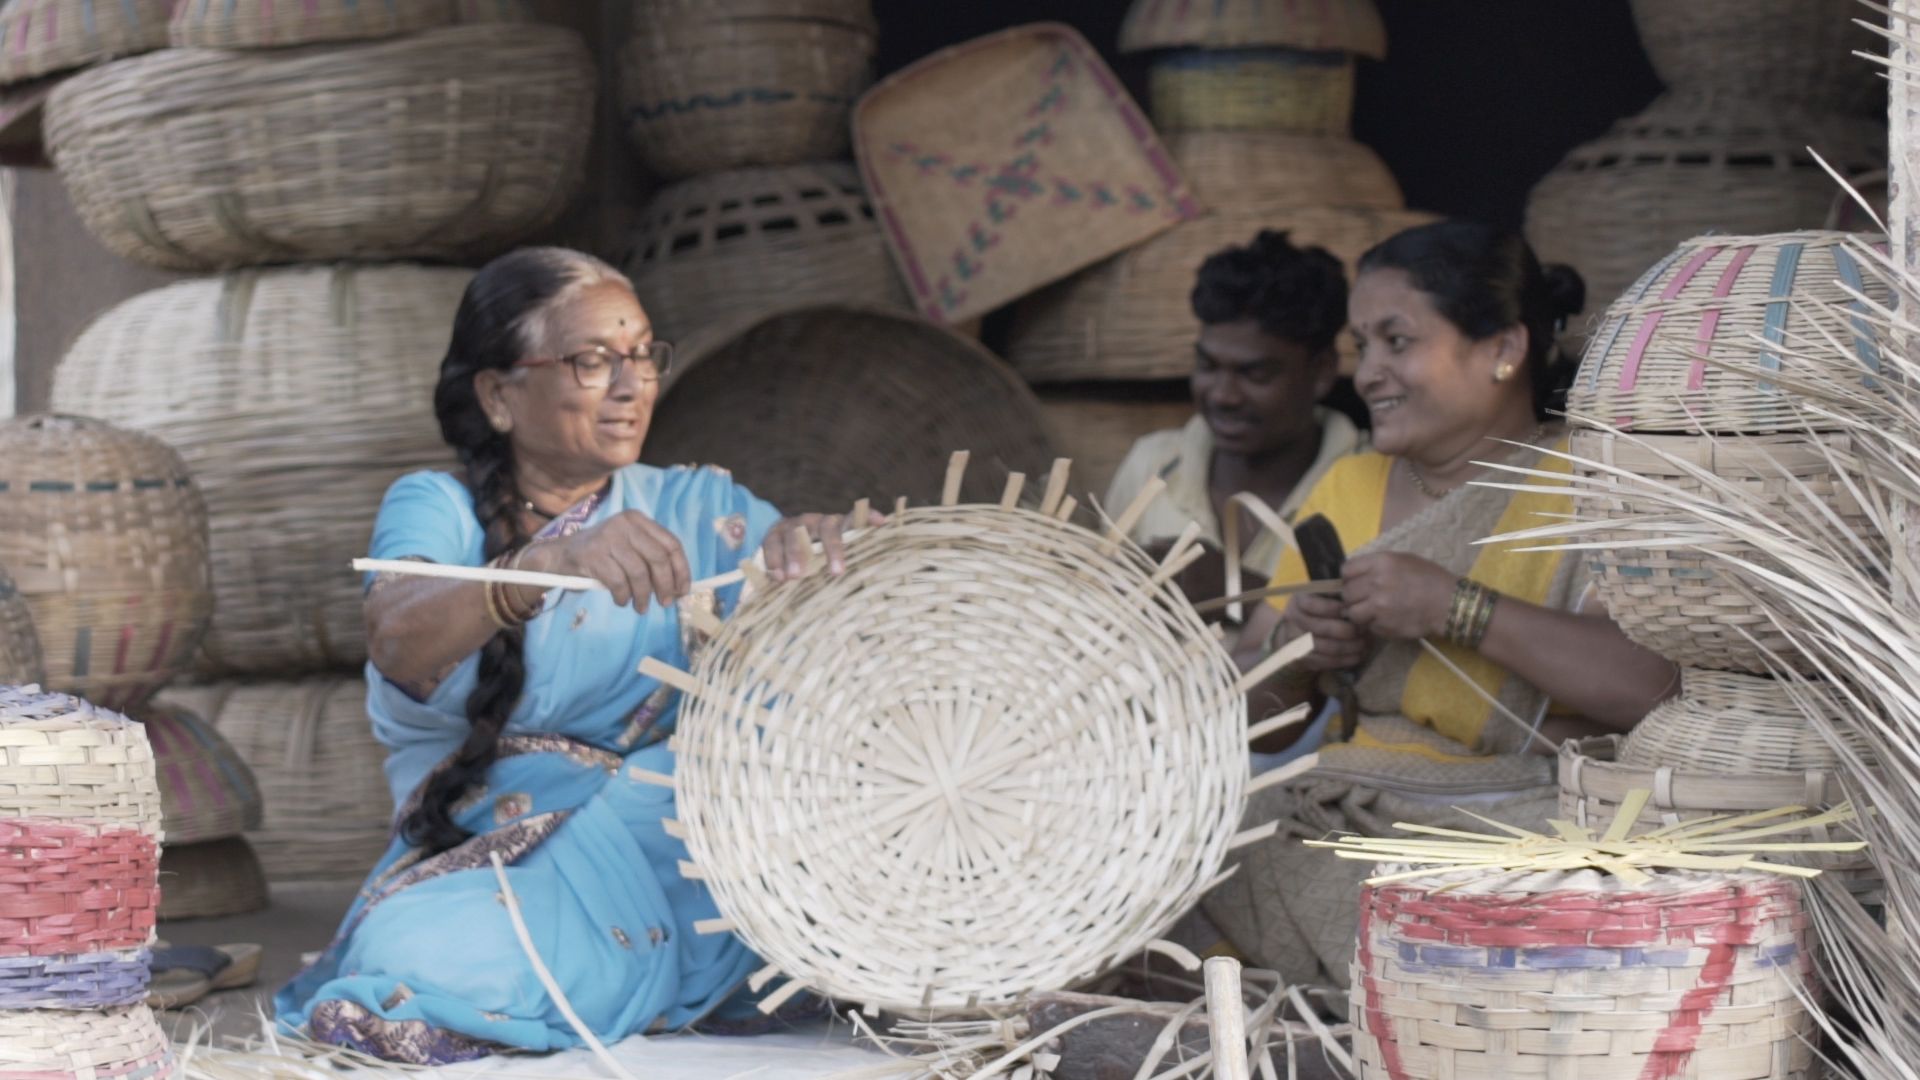 Taking pride in everything rural and handmade, how Maharashtra is spinning a success narrative of its forgotten artisans